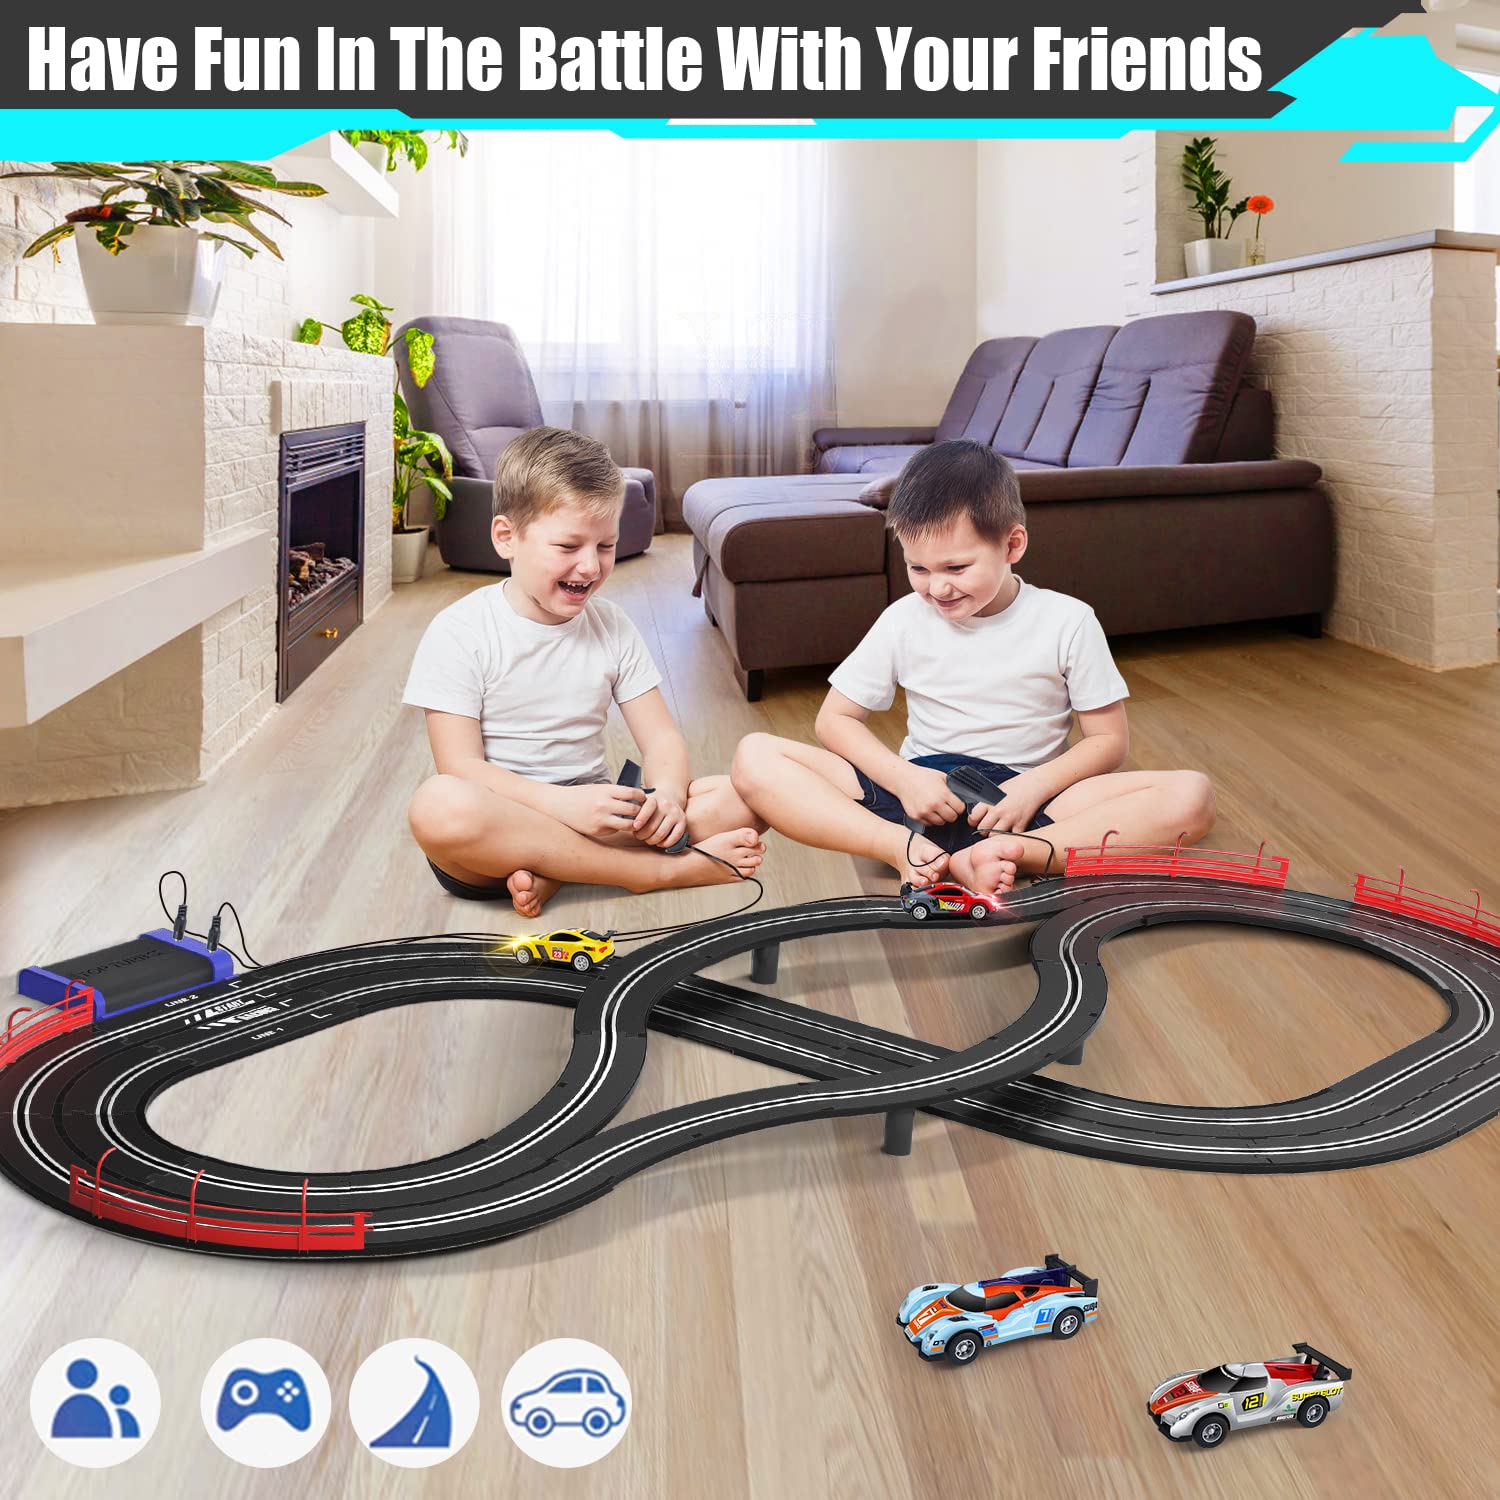 Electric Racing Tracks for Boys and Kids Including 4 Slot Cars 1:43 Scale with Headlights and Dual Racing, Race Car Track Sets with 2 Hand Controllers, Gift Toys for Children Over 8 Years Old